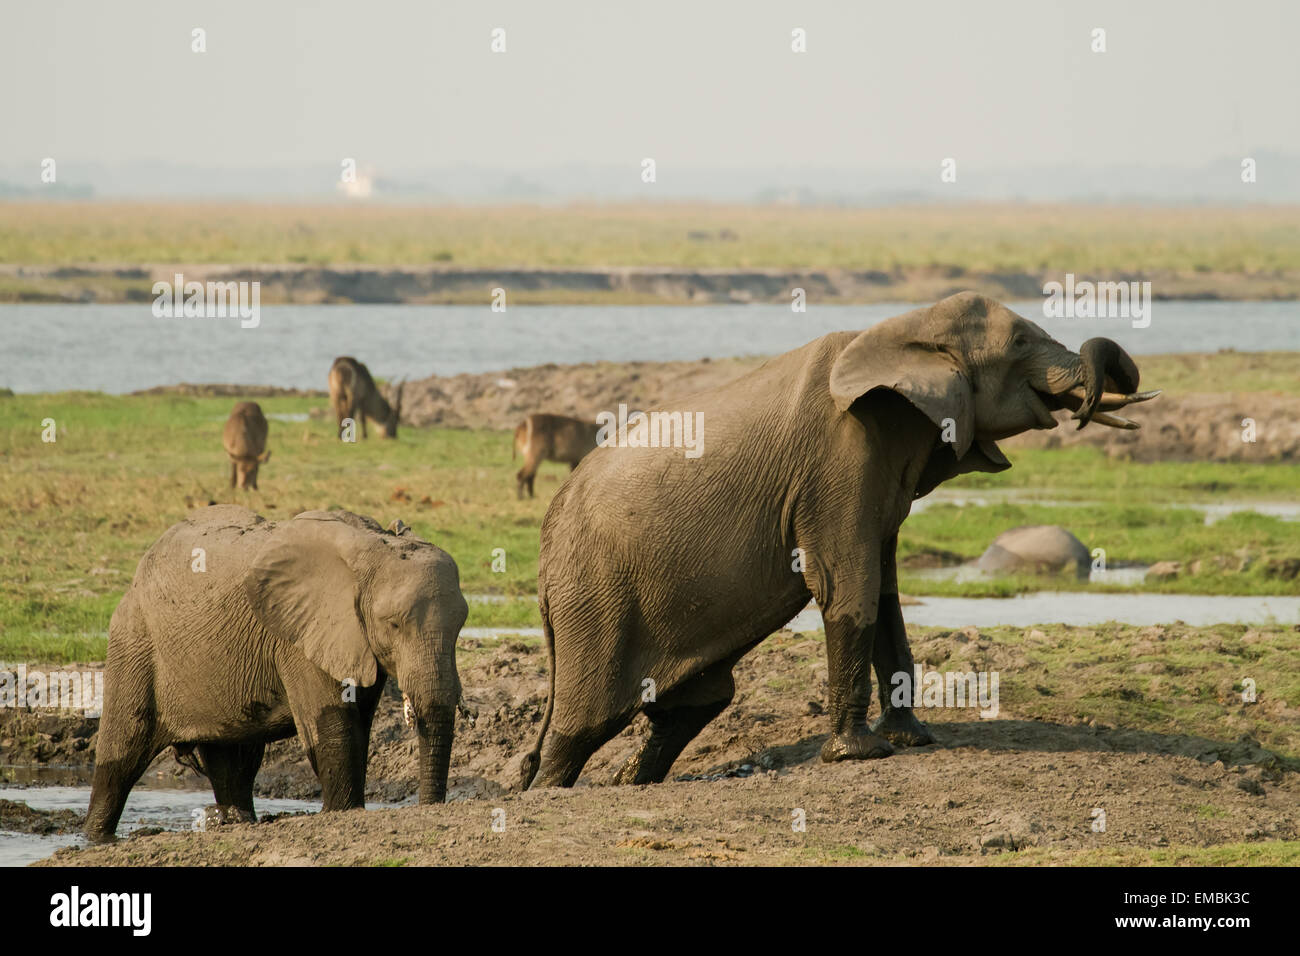 African Elephants wading in a water hole with Waterbuck in the background, in Chobe National Park, Botswana, Africa Stock Photo